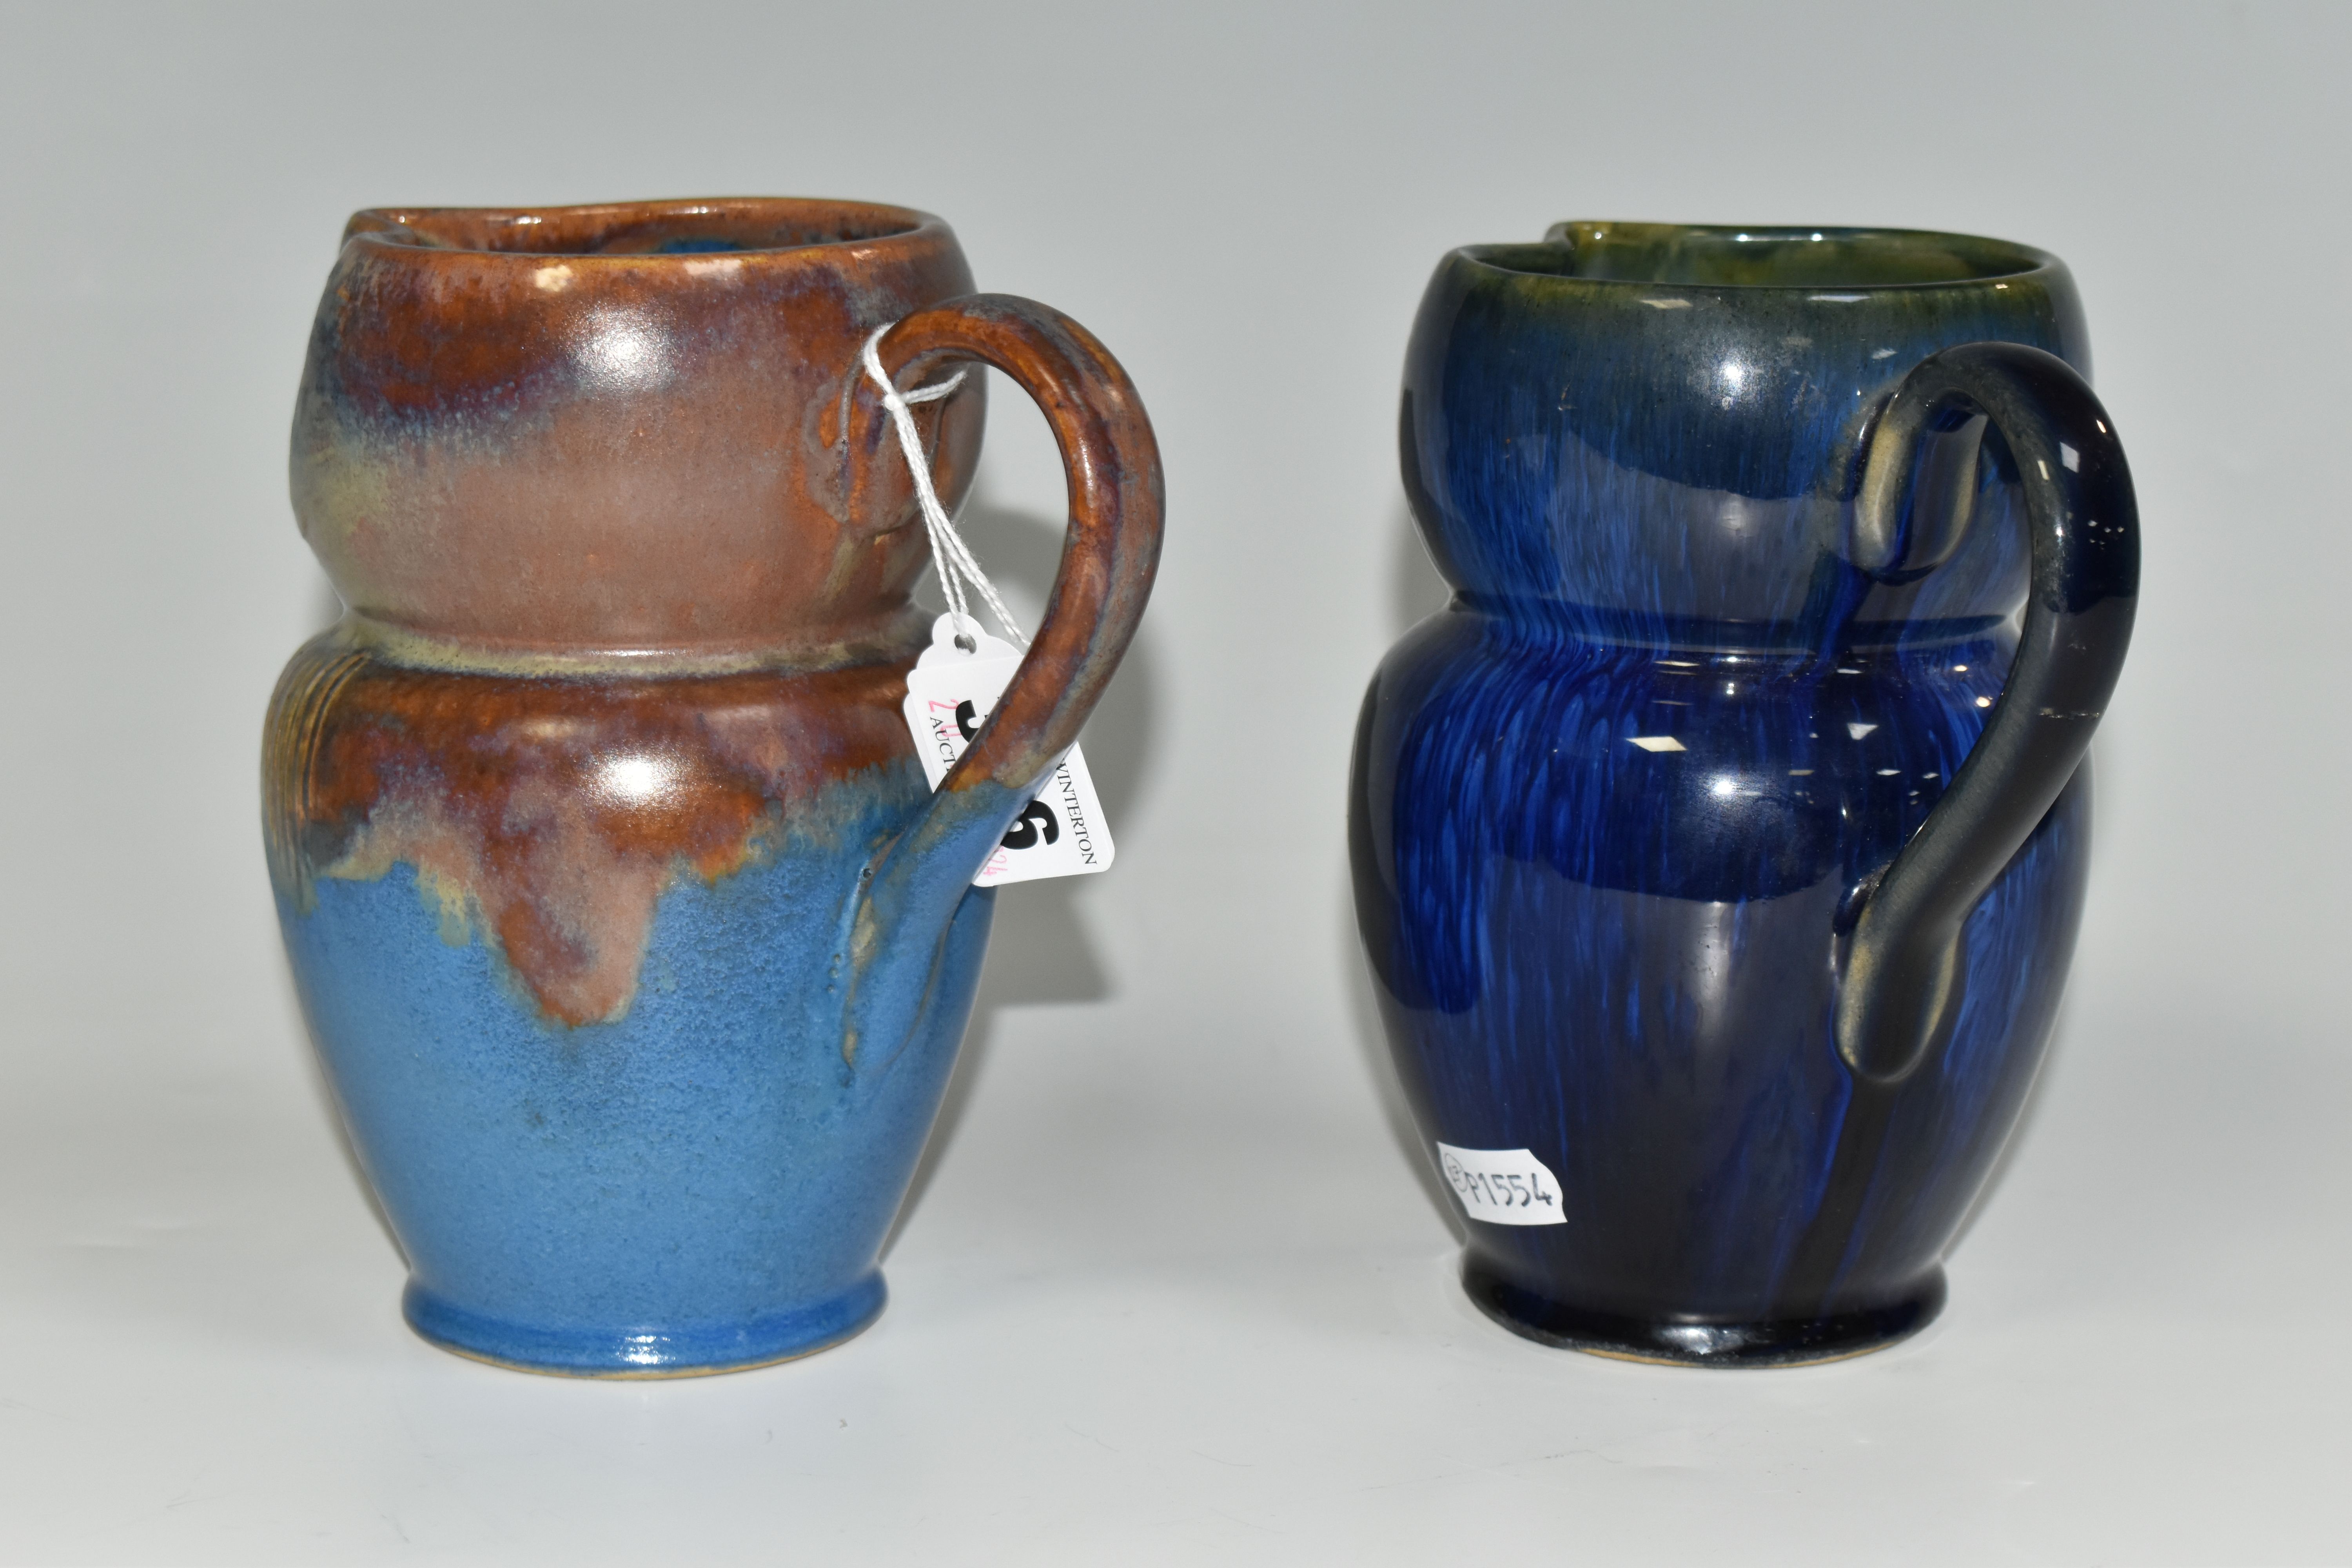 TWO BOURNE DENBY OWL JUGS, 1920s-1930s Danesby Ware, one with mid blue and brown glaze, the other - Image 3 of 6